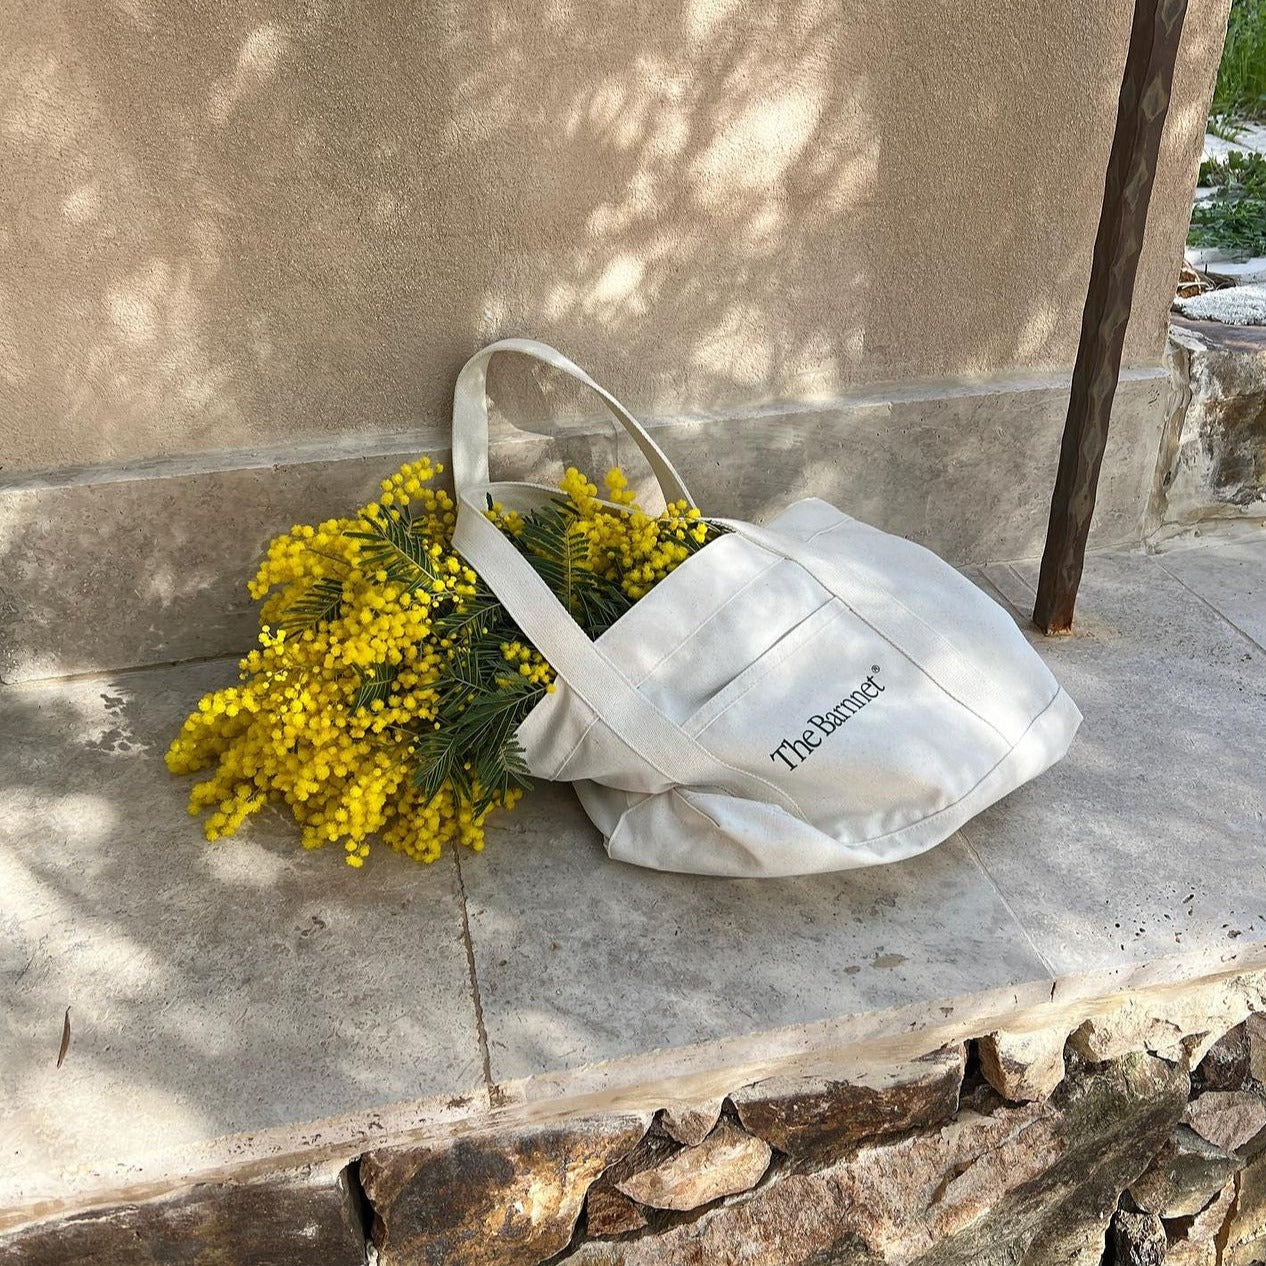 [the Barnnet] Ivory Canvas Gardening Tote Bag (PRE-ORDER)